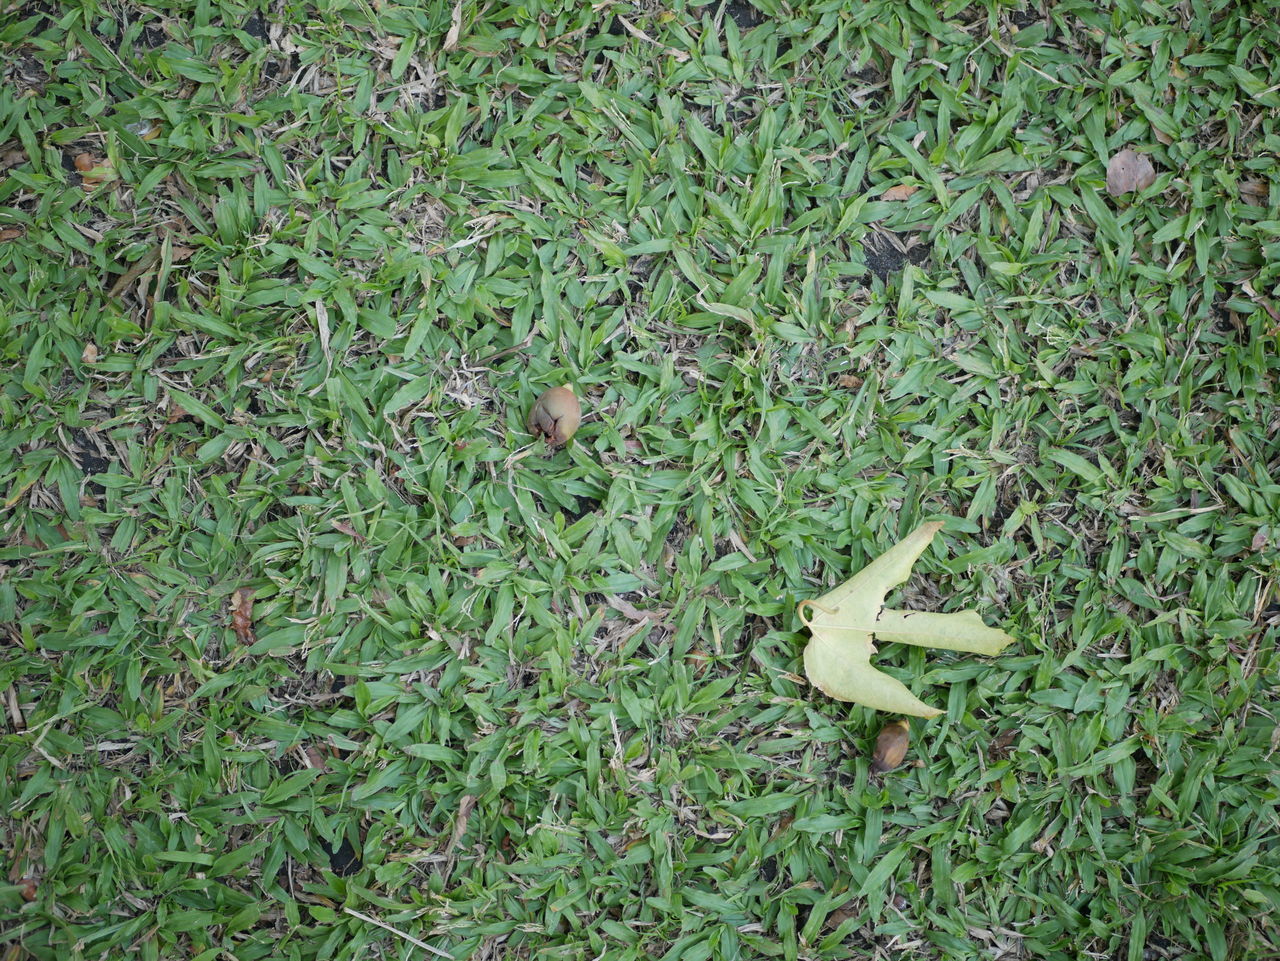 HIGH ANGLE VIEW OF TOY ON GRASSY FIELD